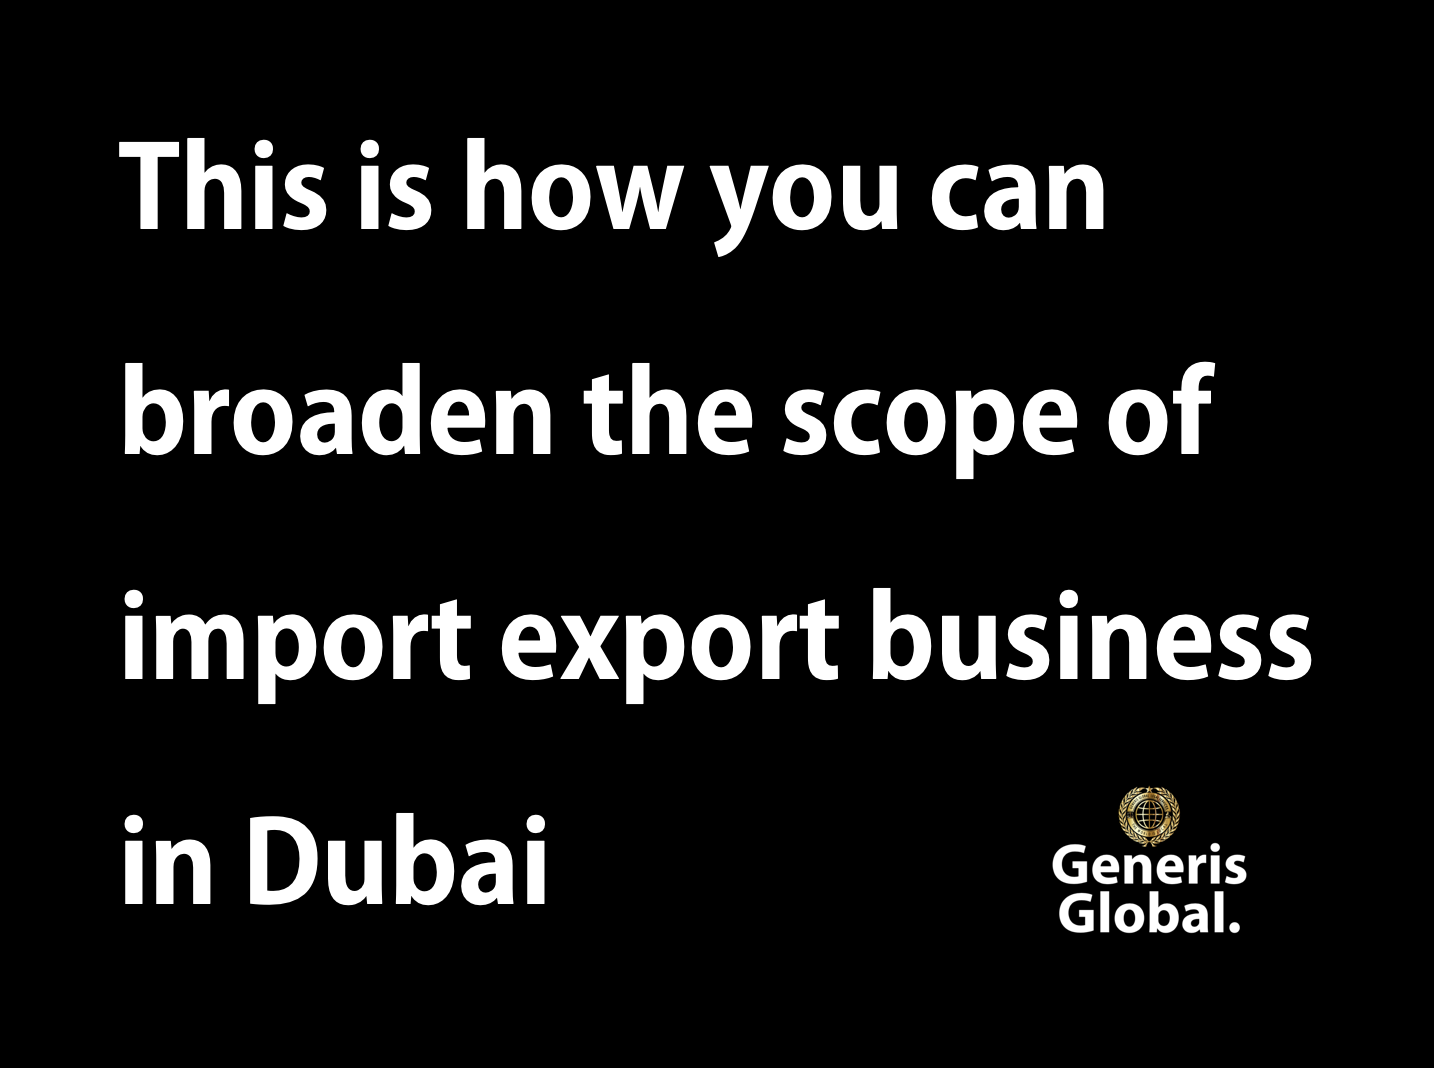 This is how you can broaden the scope of import export business in Dubai